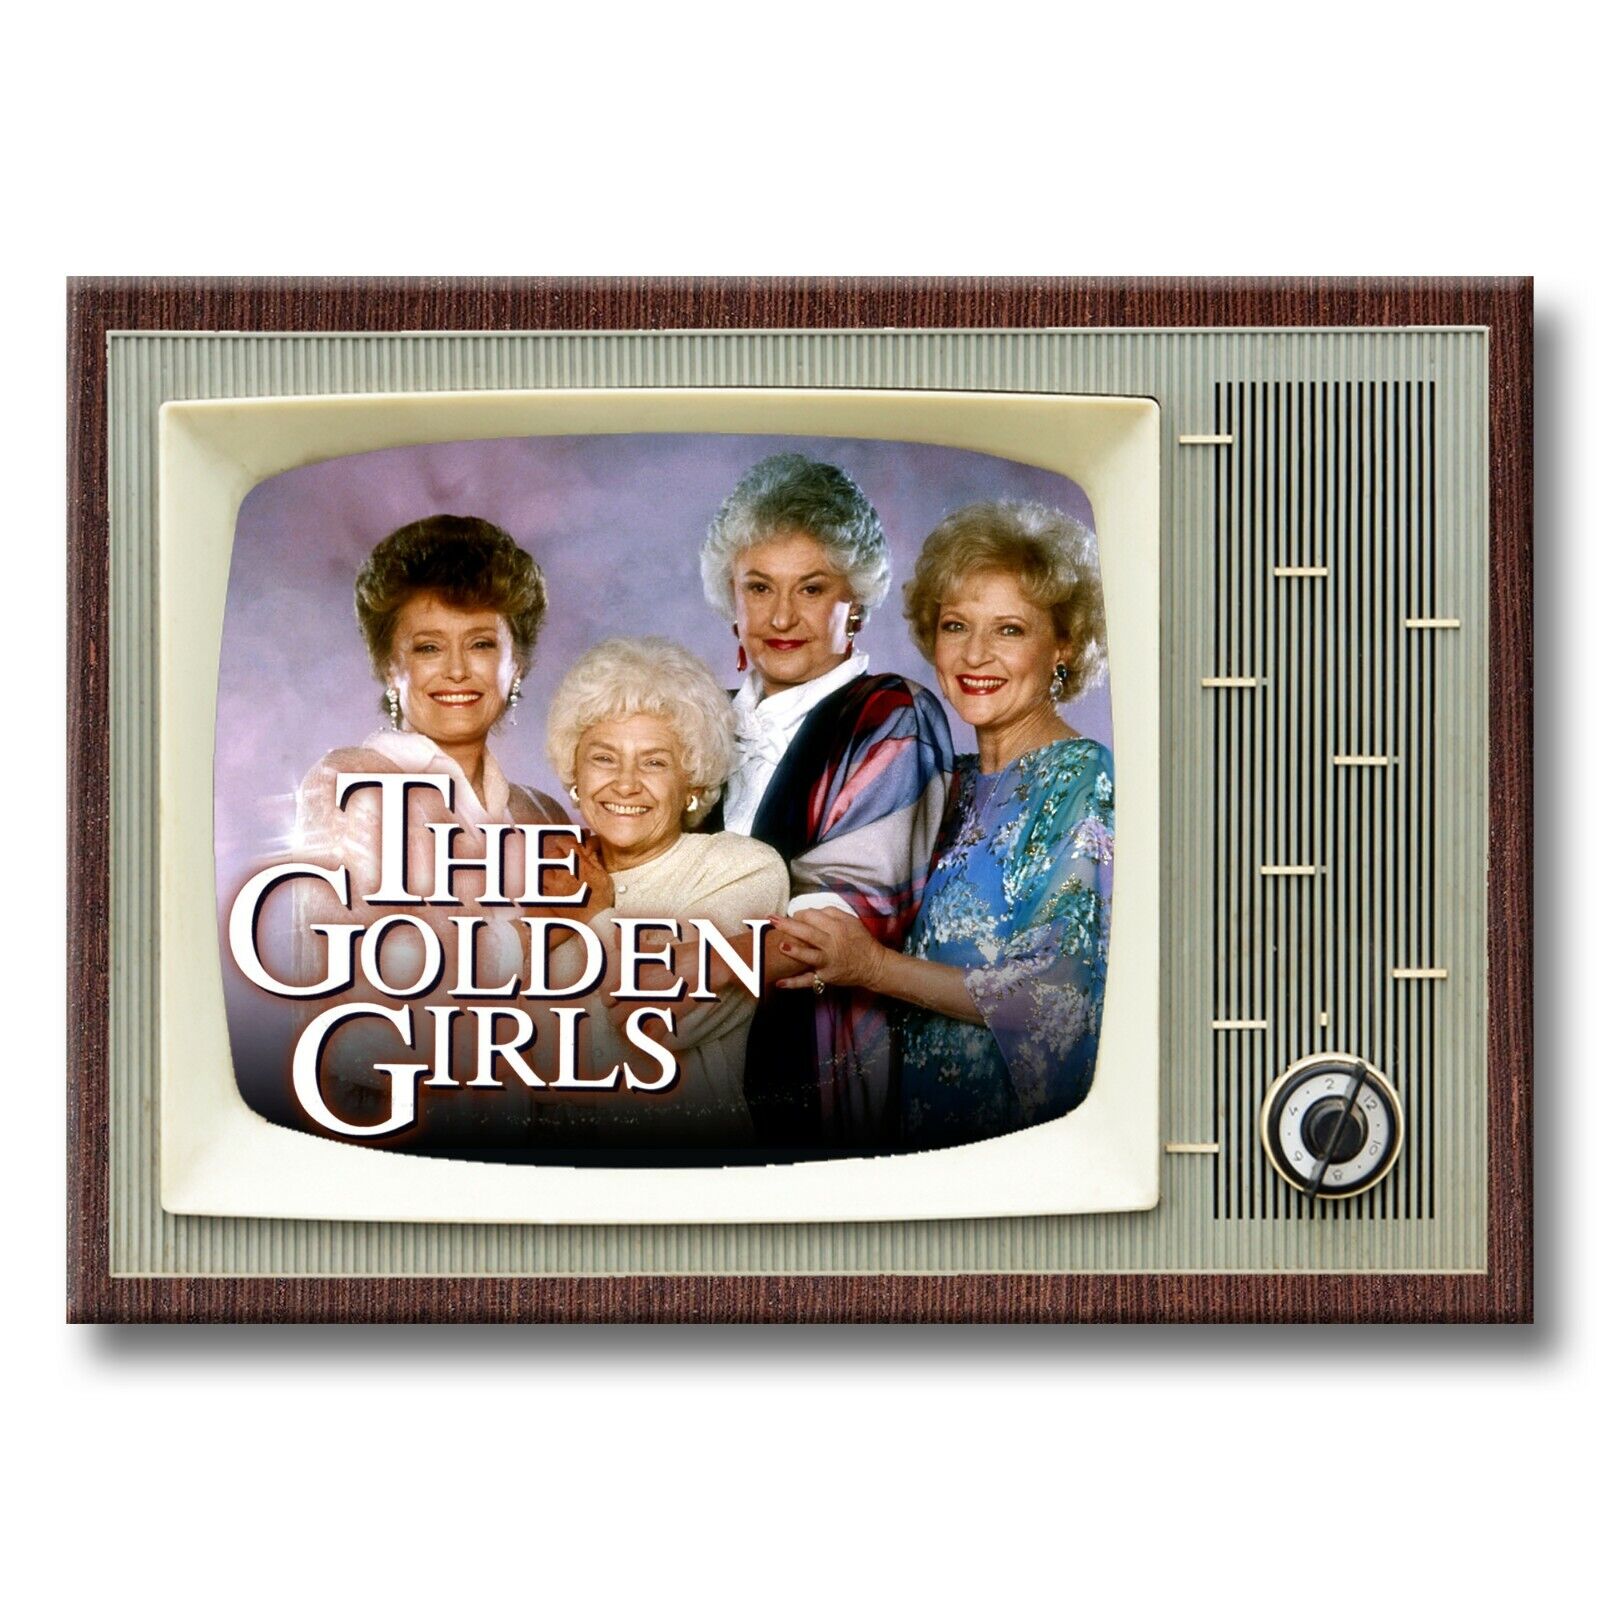 THE GOLDEN GIRLS Classic TV 3.5 inches x 2.5 inches Betty White FRIDGE MAGNET